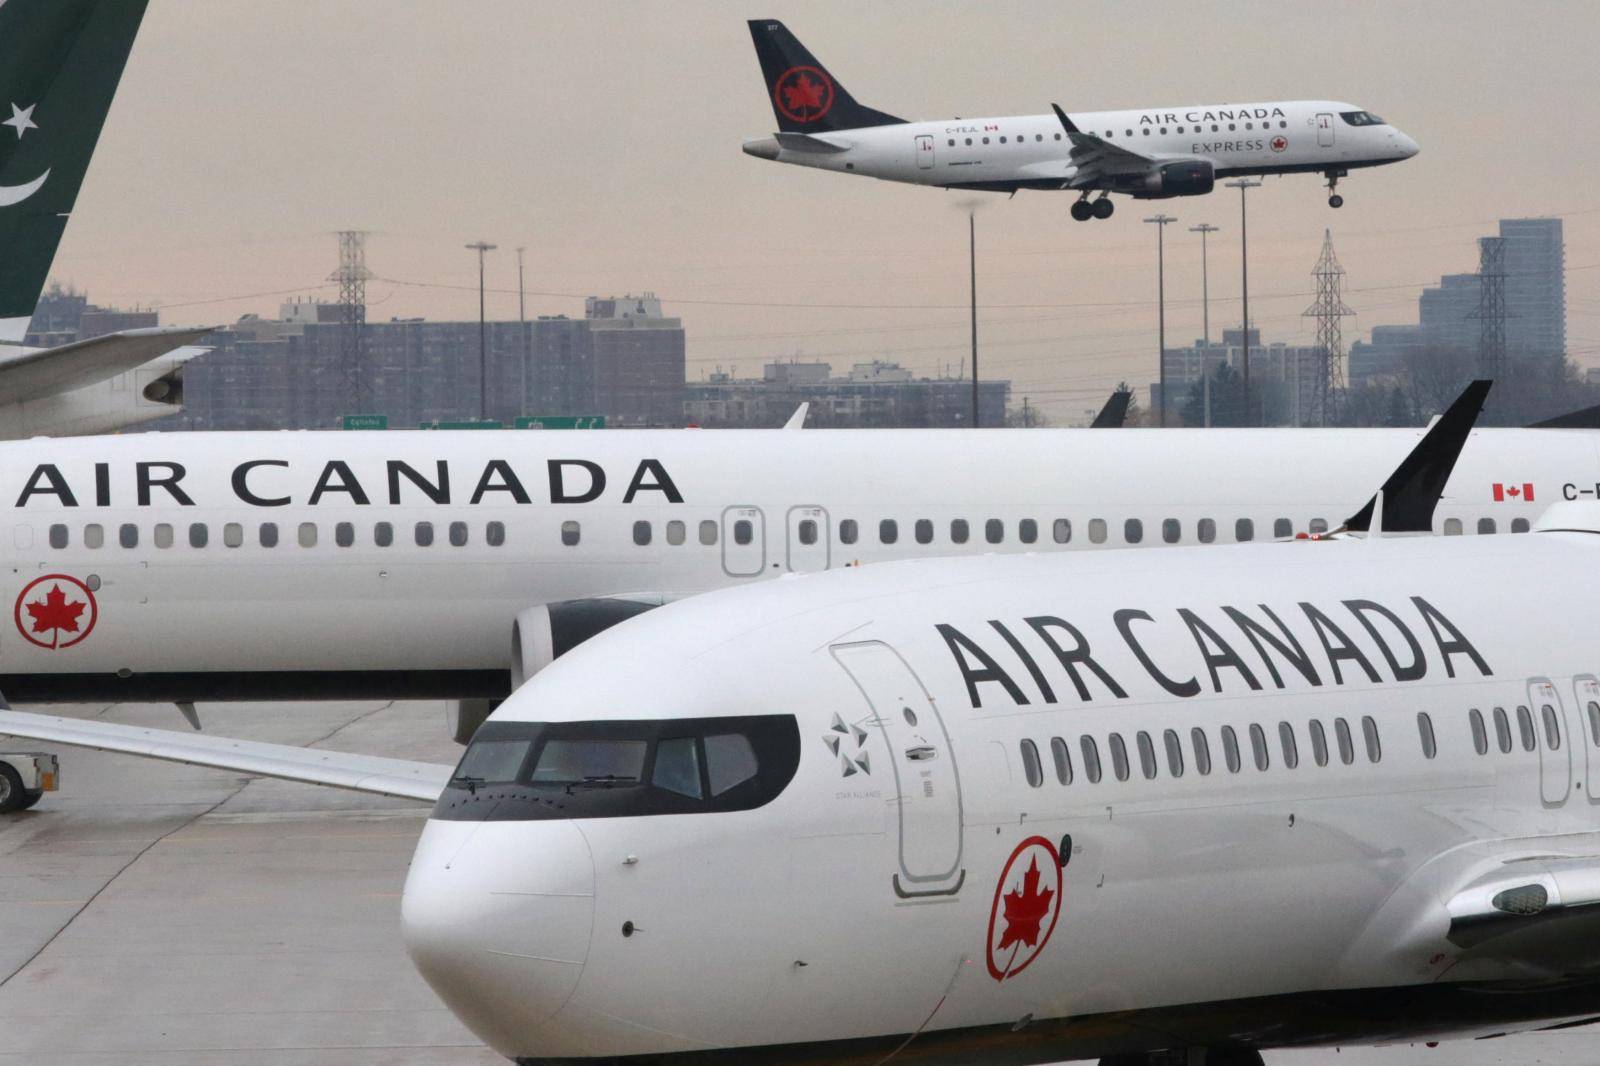 Two Air Canada Boeing 737 MAX 8 aircrafts are seen on the ground as Air Canada Embraer aircraft flies in the background at Toronto Pearson International Airport